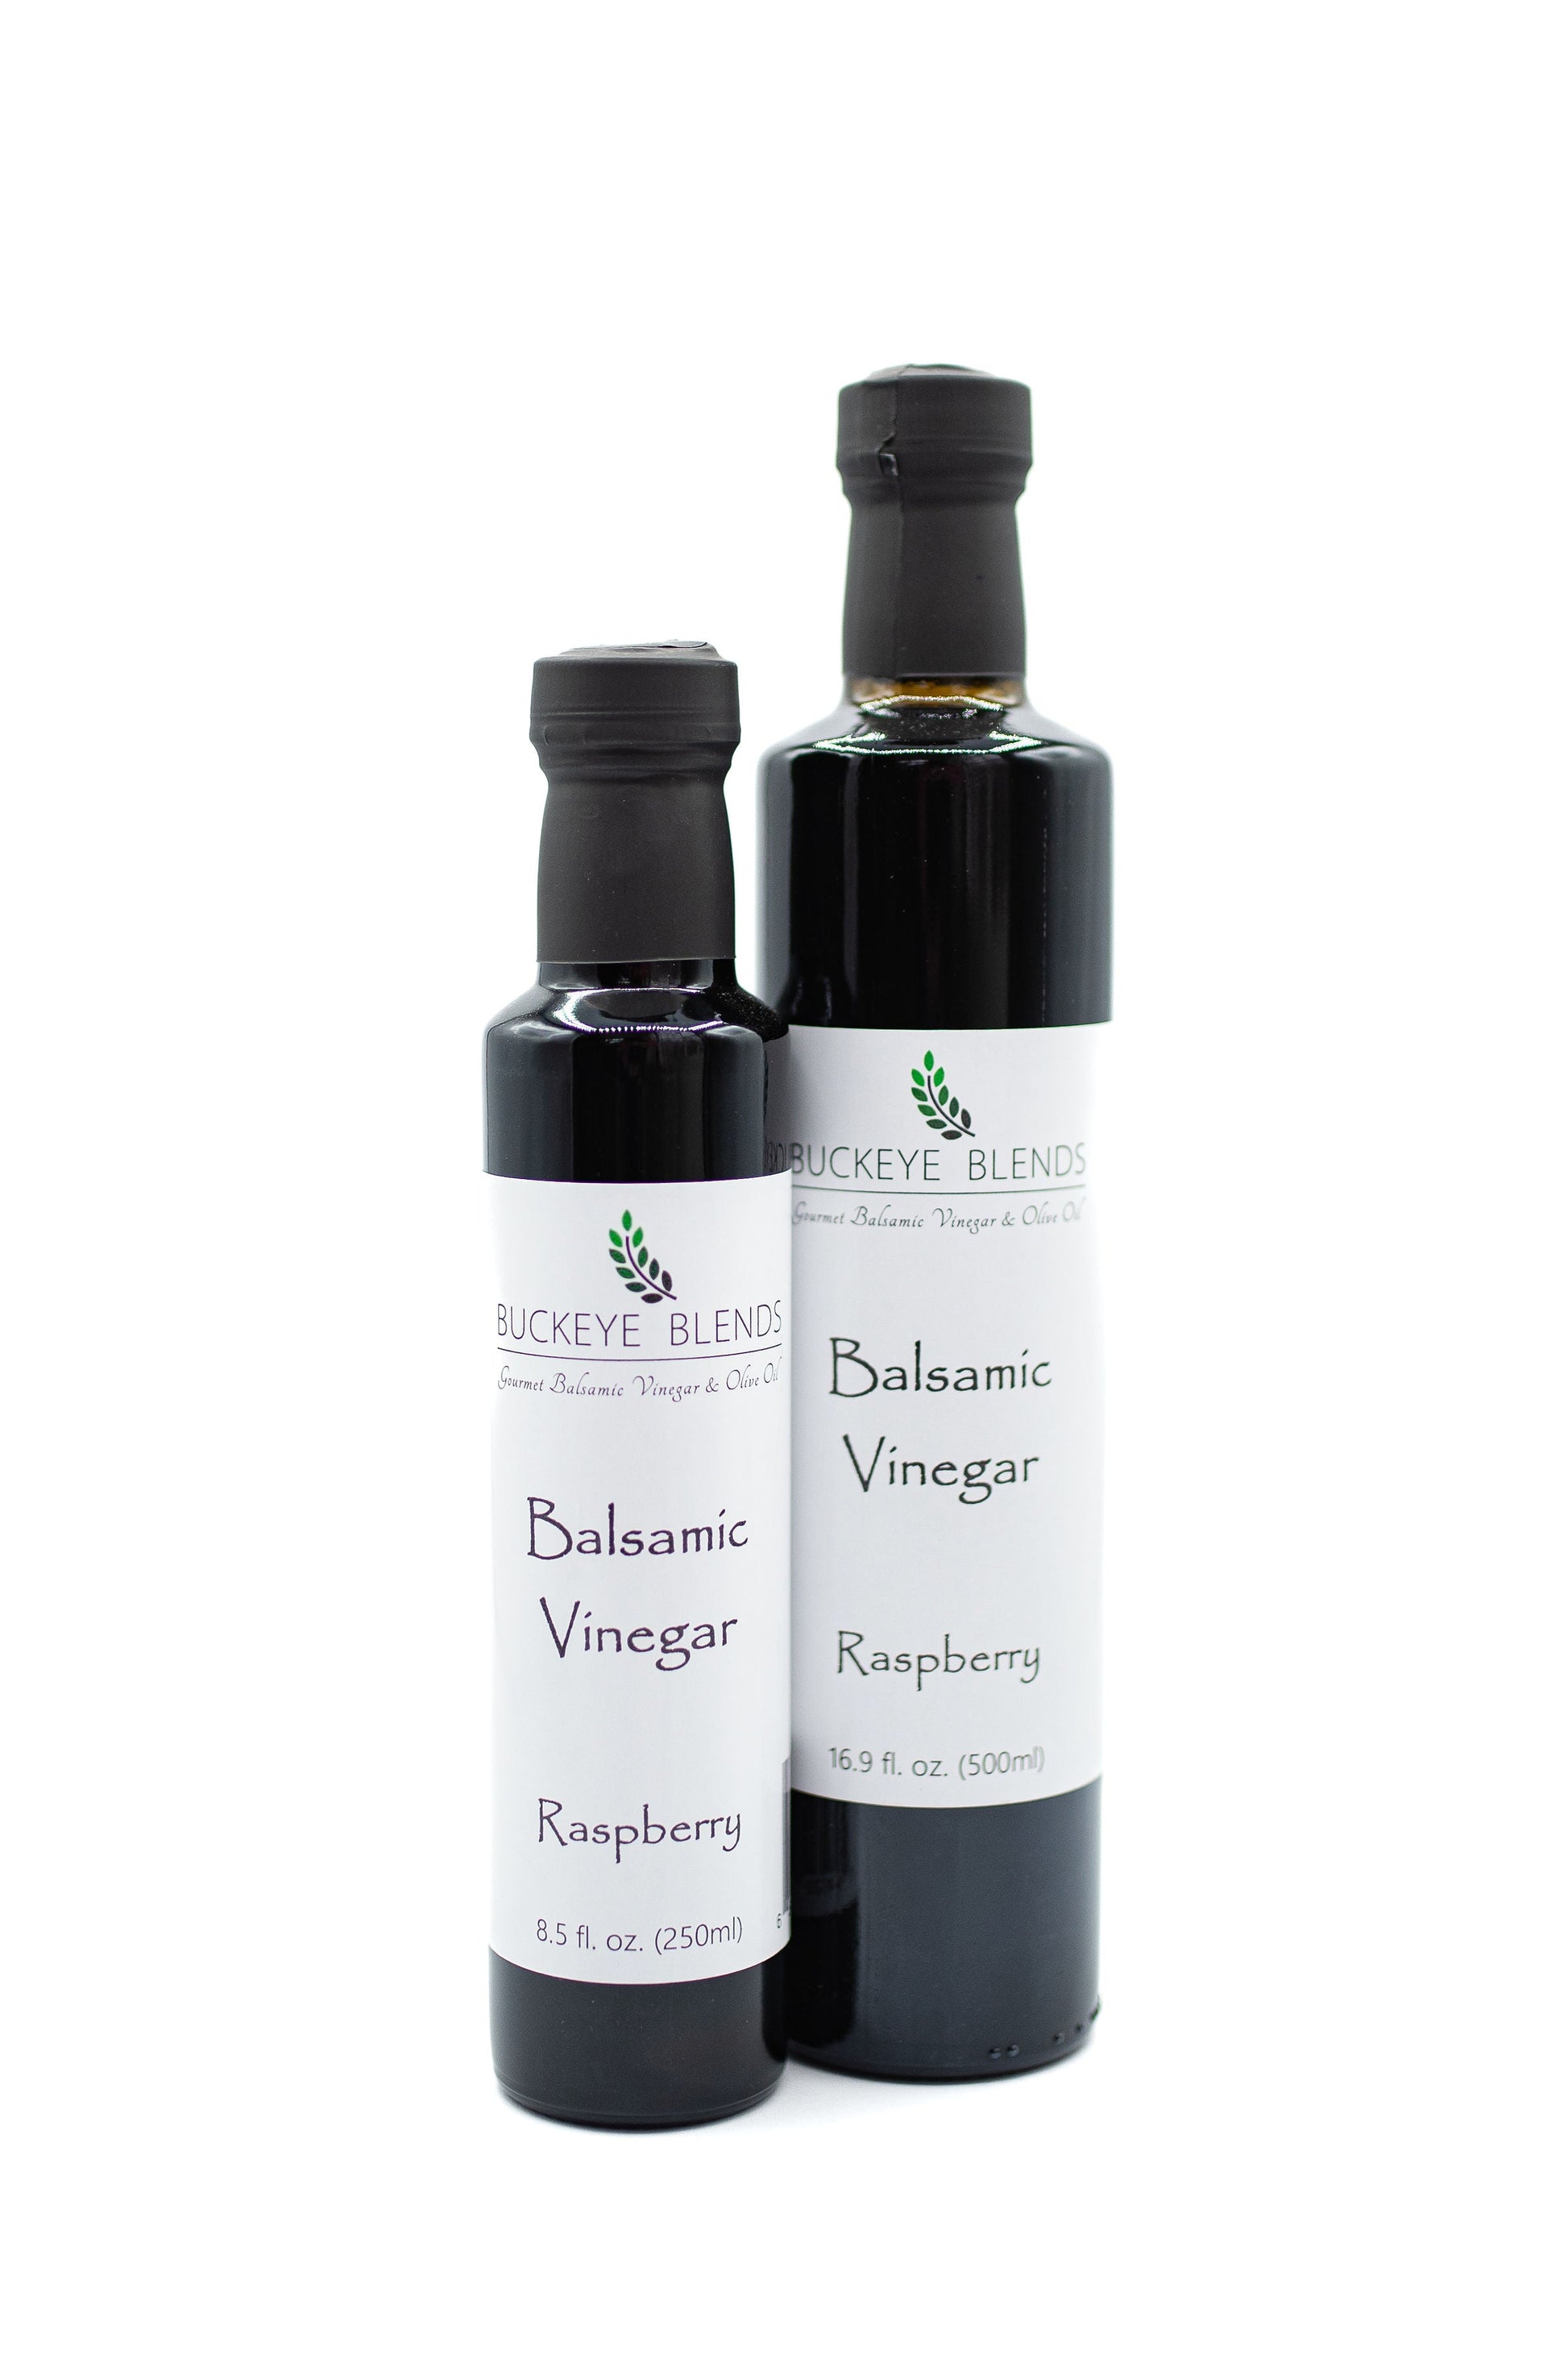 Buckeye Blends Raspberry Balsamic Vinegar is a thick and rich balsamic glaze perfect over ice cream, veggies, chicken, and pork.  It pairs perfectly with our Meyer Lemon Olive Oil for a sweet citrus balsamic vinaigrette dressing.  It also pairs well with our garlic olive oil for a delicious salad dressing!